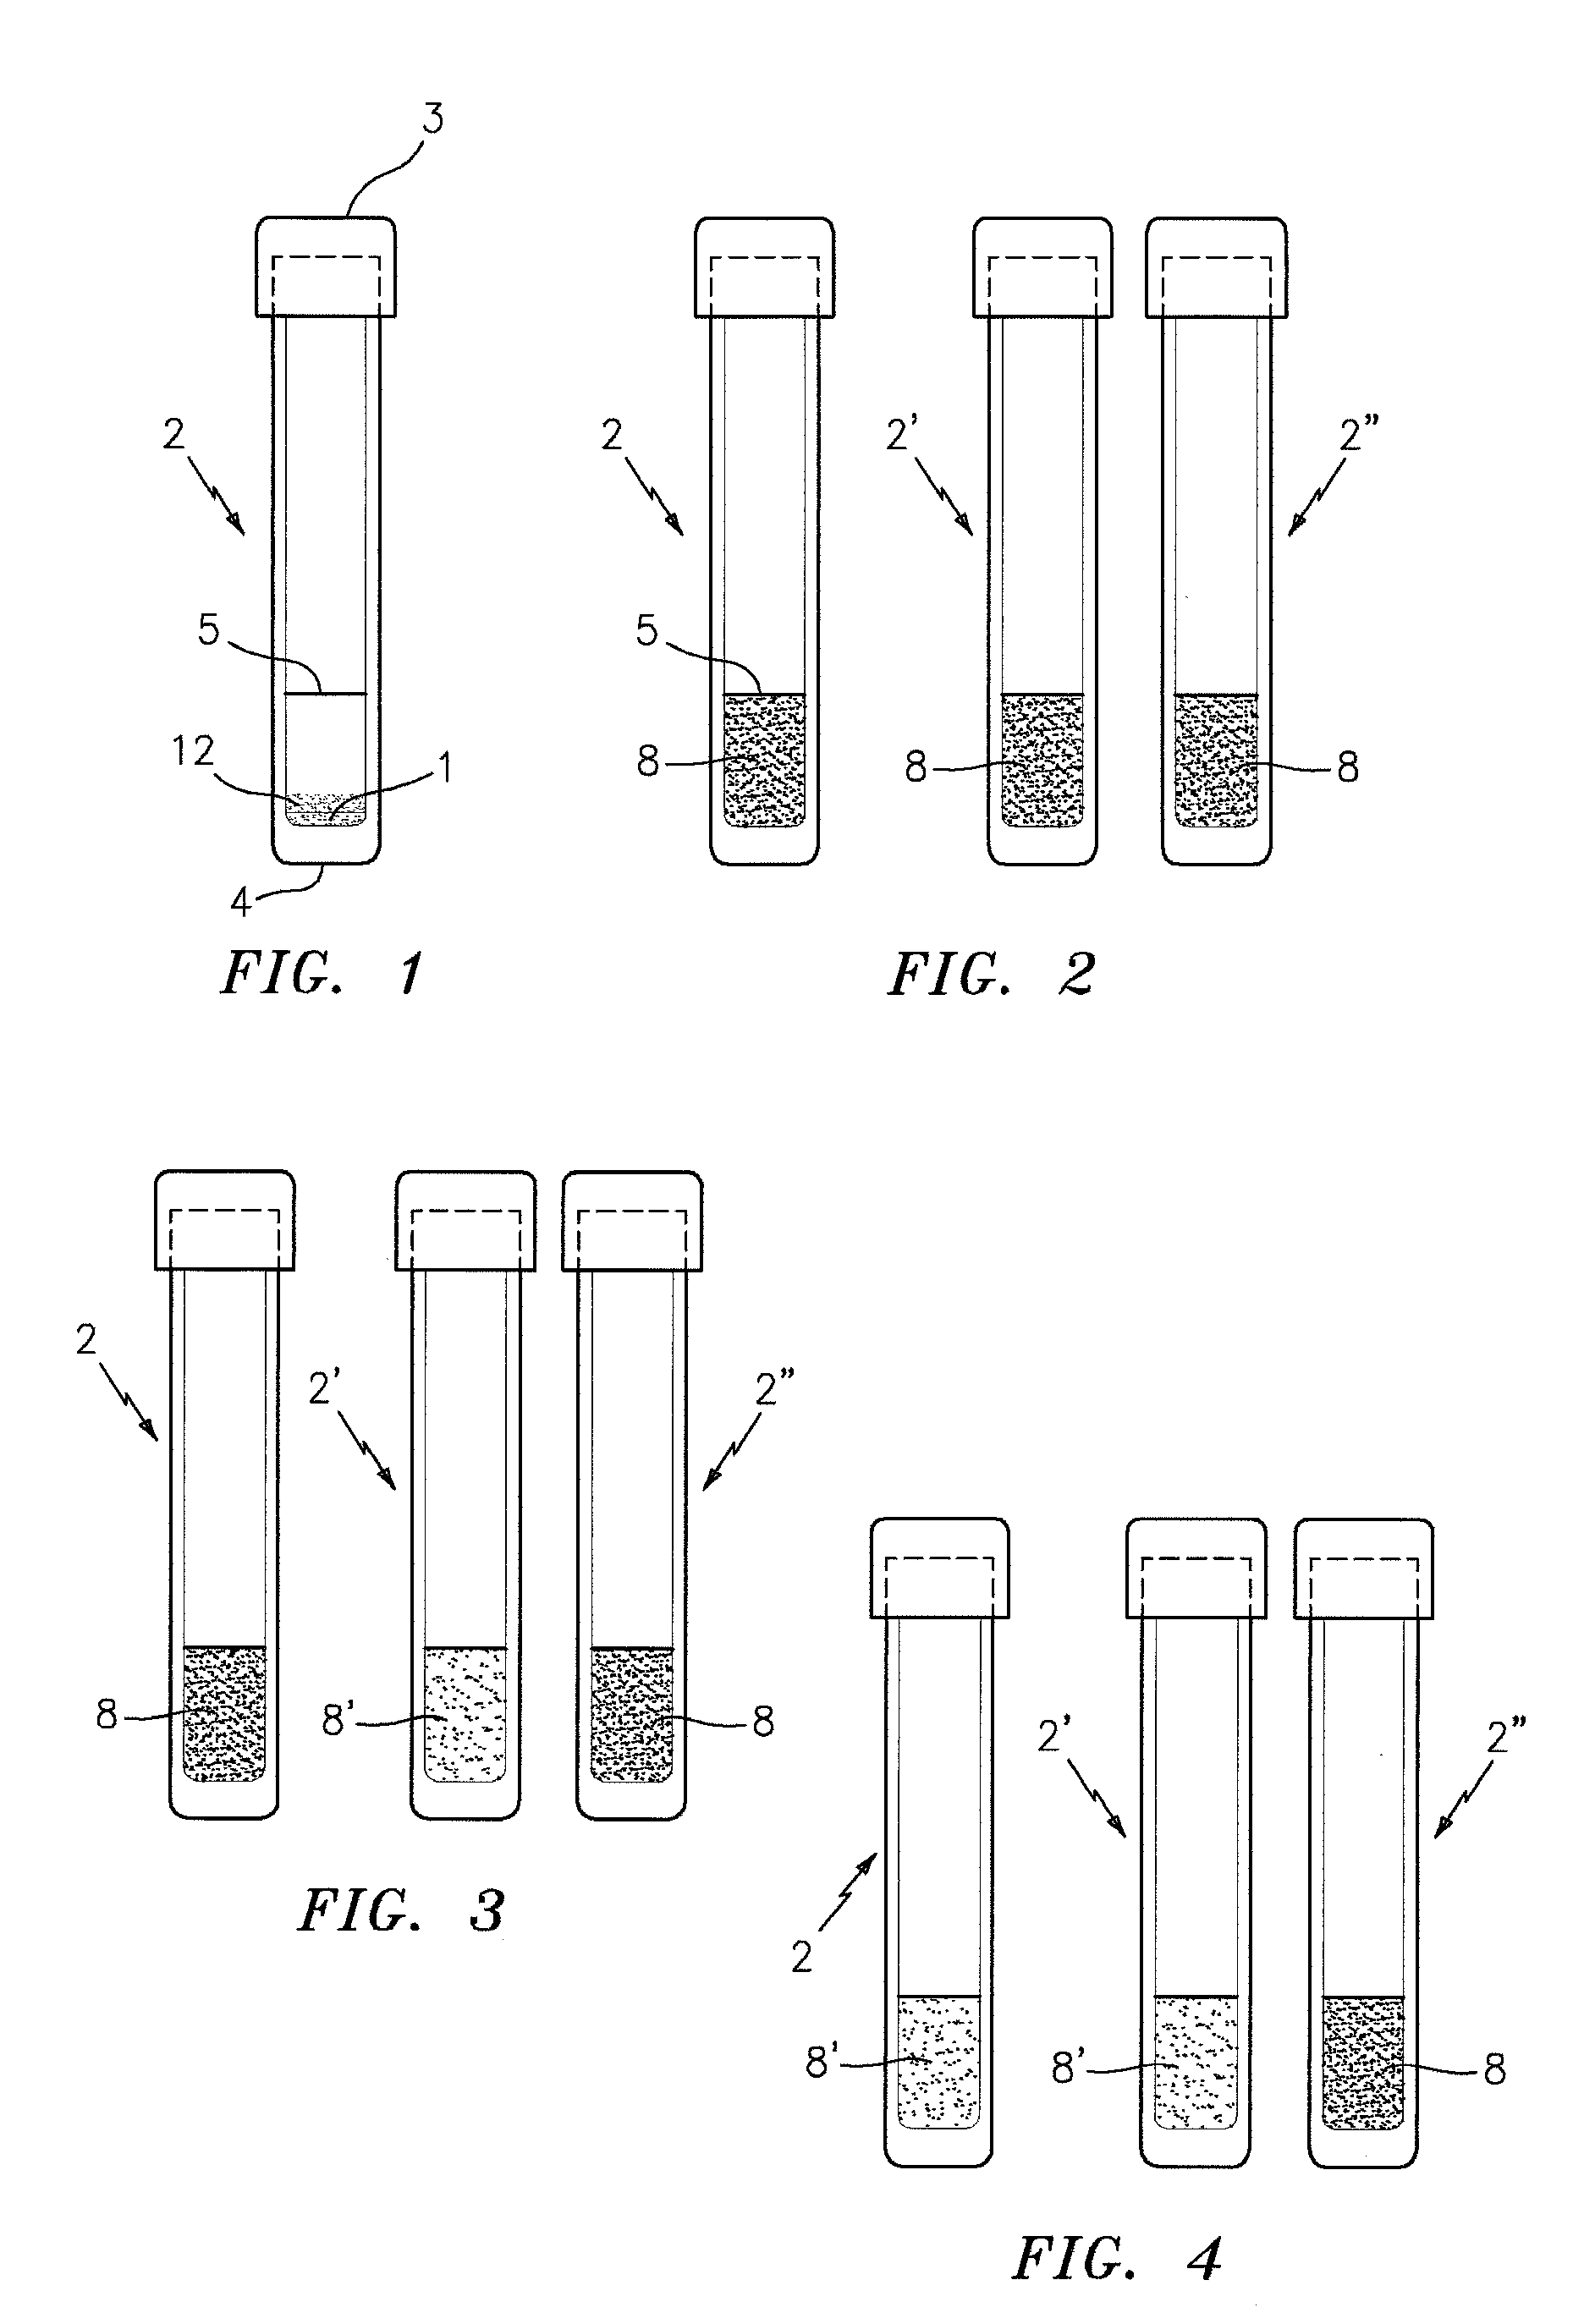 Method and medium for detecting the presence or absence of methicillin resistant staphylococcus aureus (MRSA) in a test sample